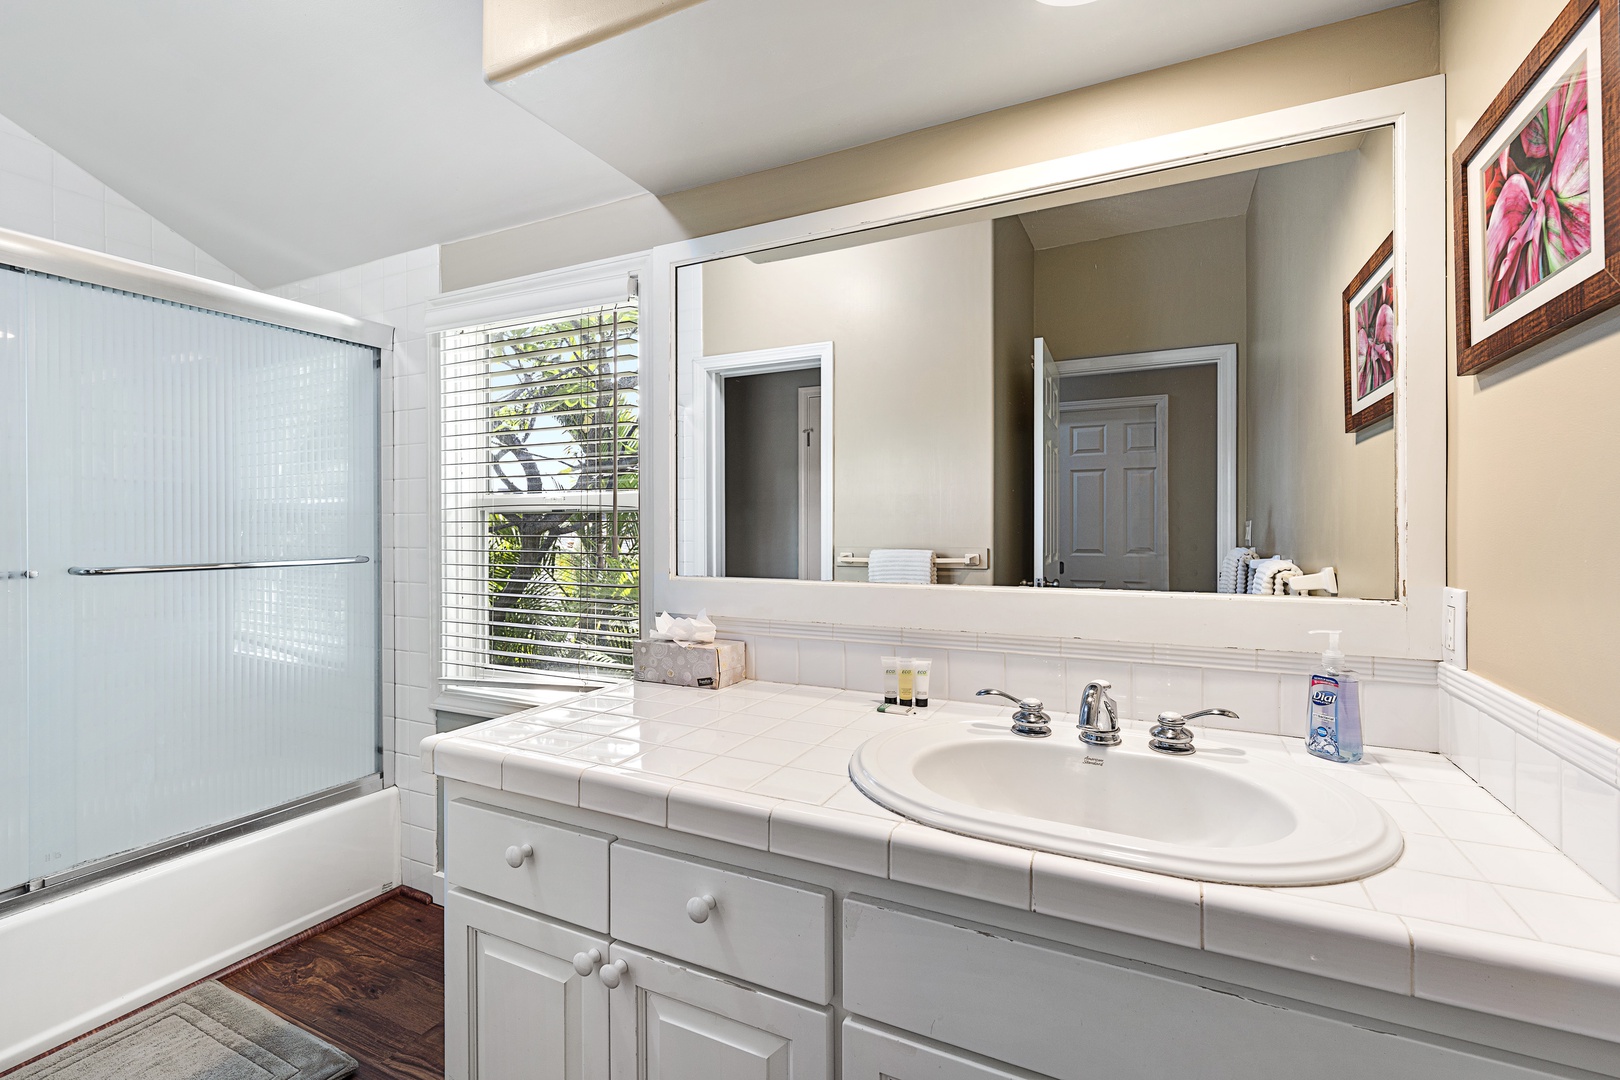 Kailua Kona Vacation Rentals, Kona Blue - Guest bathroom with two entrances shared by the three guest bedrooms on the upper level